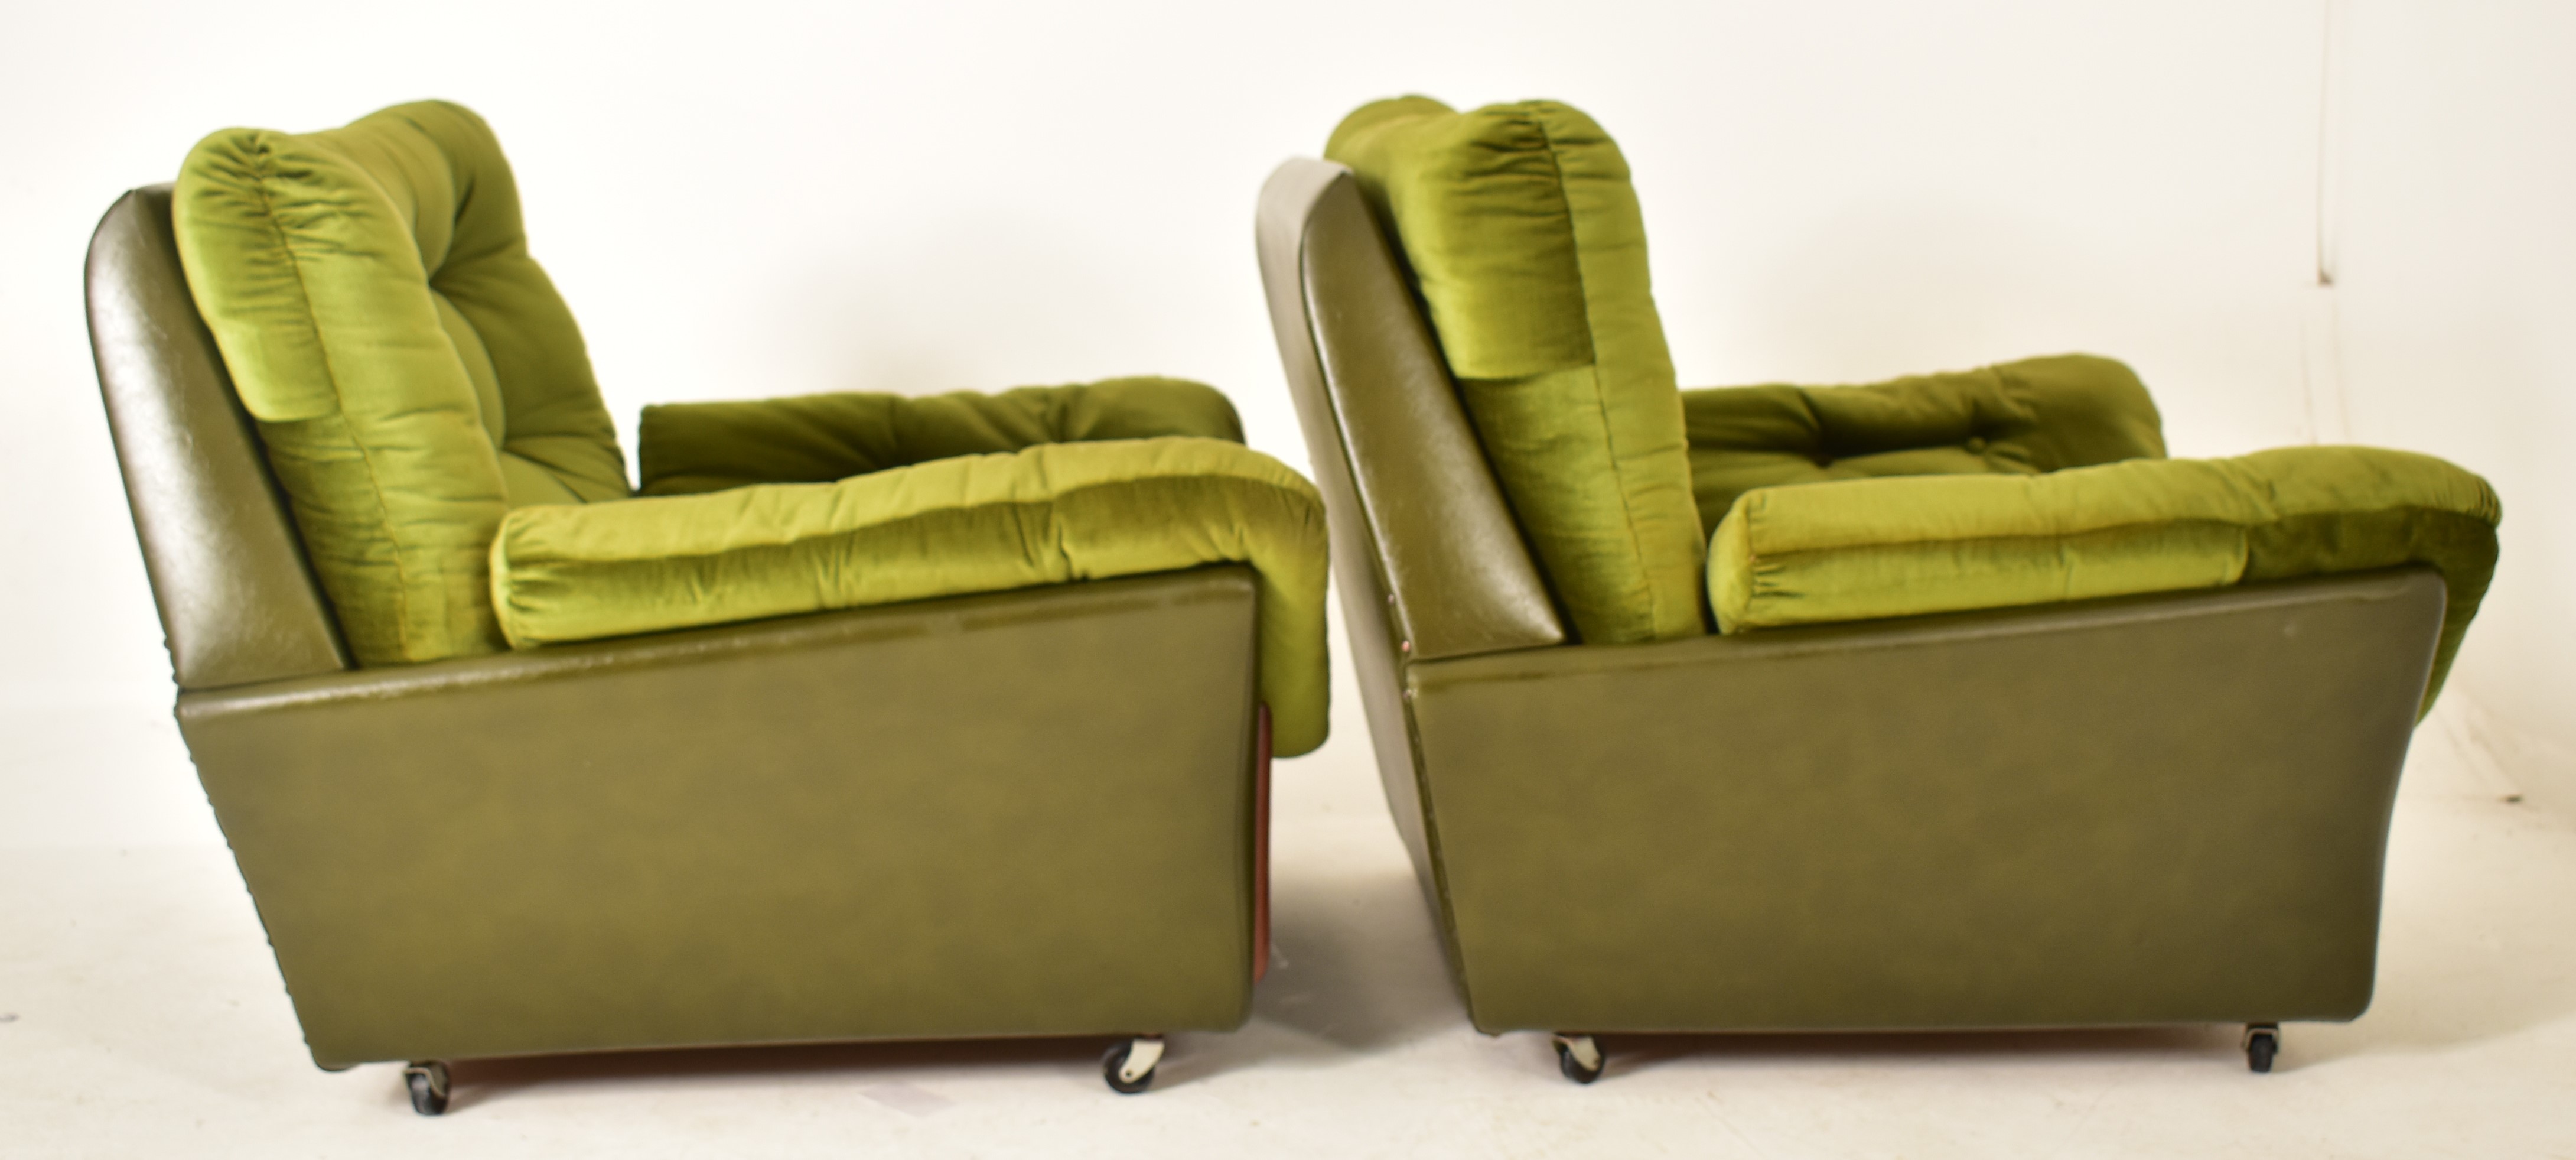 DYKES FURNITURE - PAIR OF MID CENTURY SCOTTISH ARMCHAIRS - Image 5 of 5